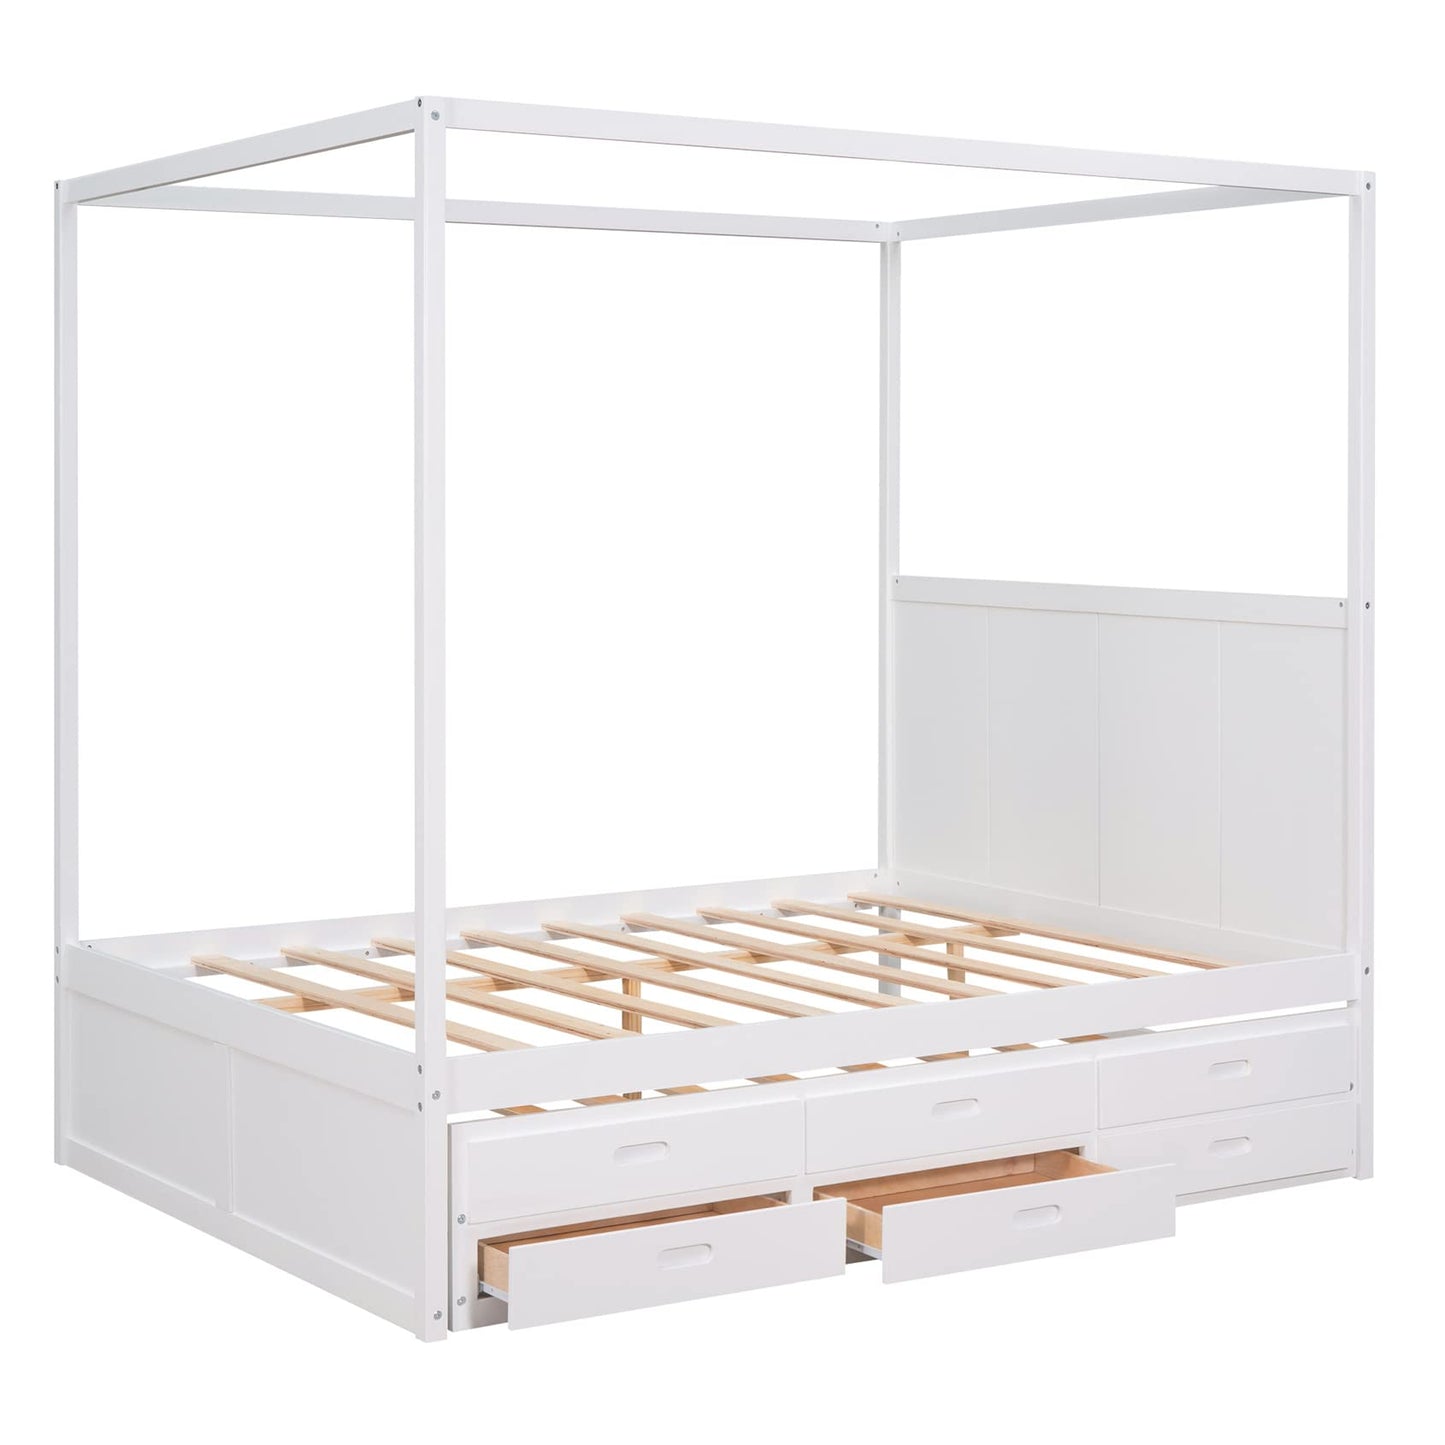 Queen Canopy Beds with Trundle Wood 4-Poster Bed with Storage Drawers Modern Queen Size Bed Frame with Headboard for Adults Kids Teens, White